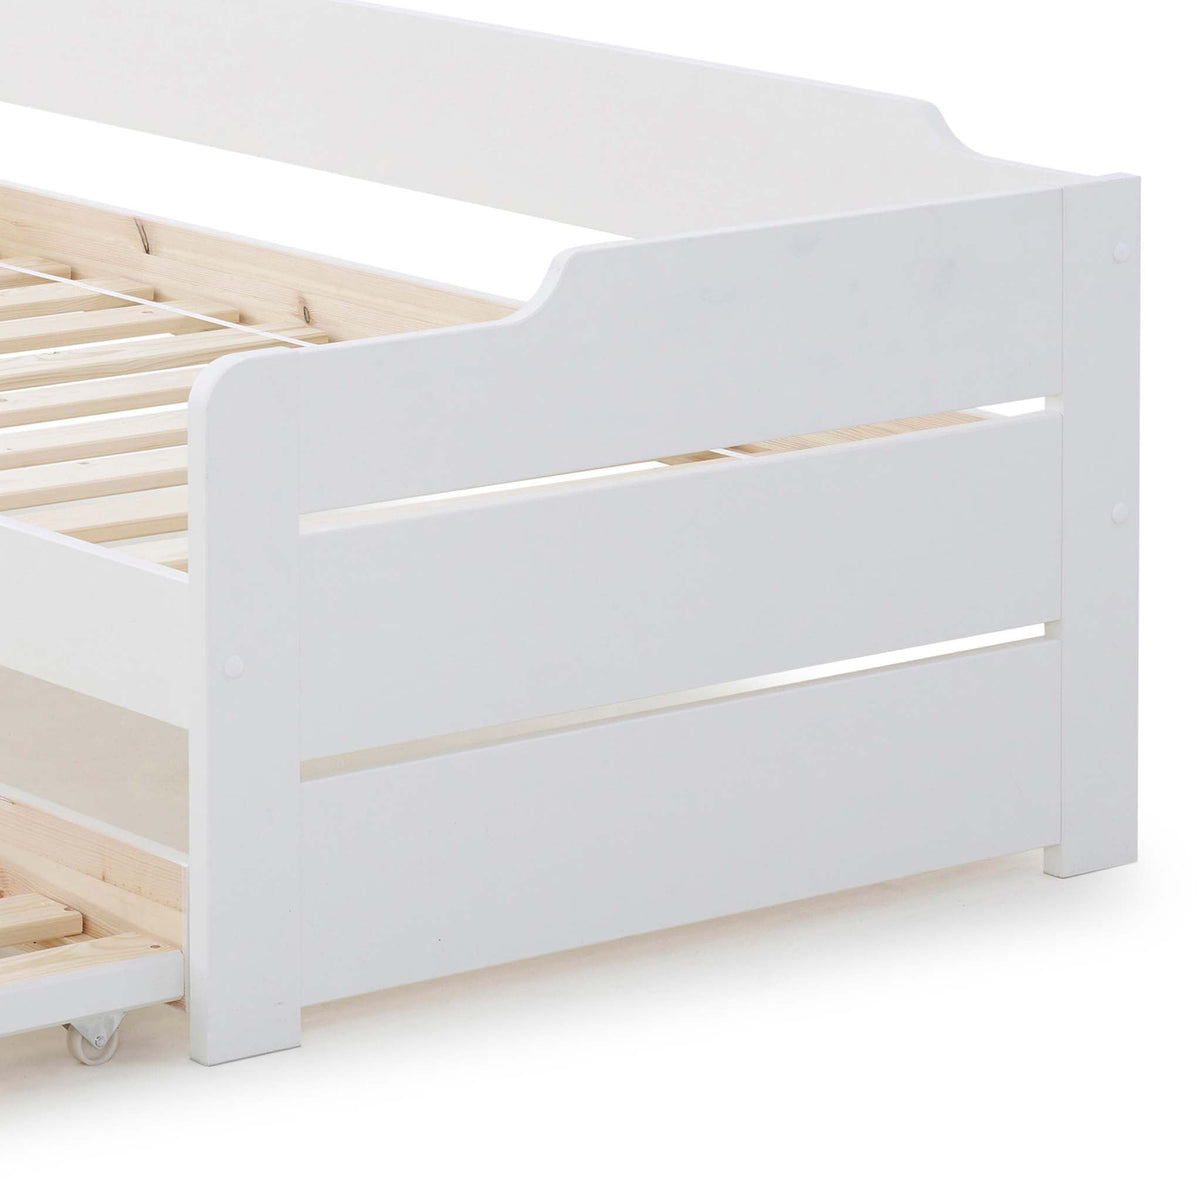 close up of the white painted wooden frame on the Snooze White Wooden Bed with Trundle 